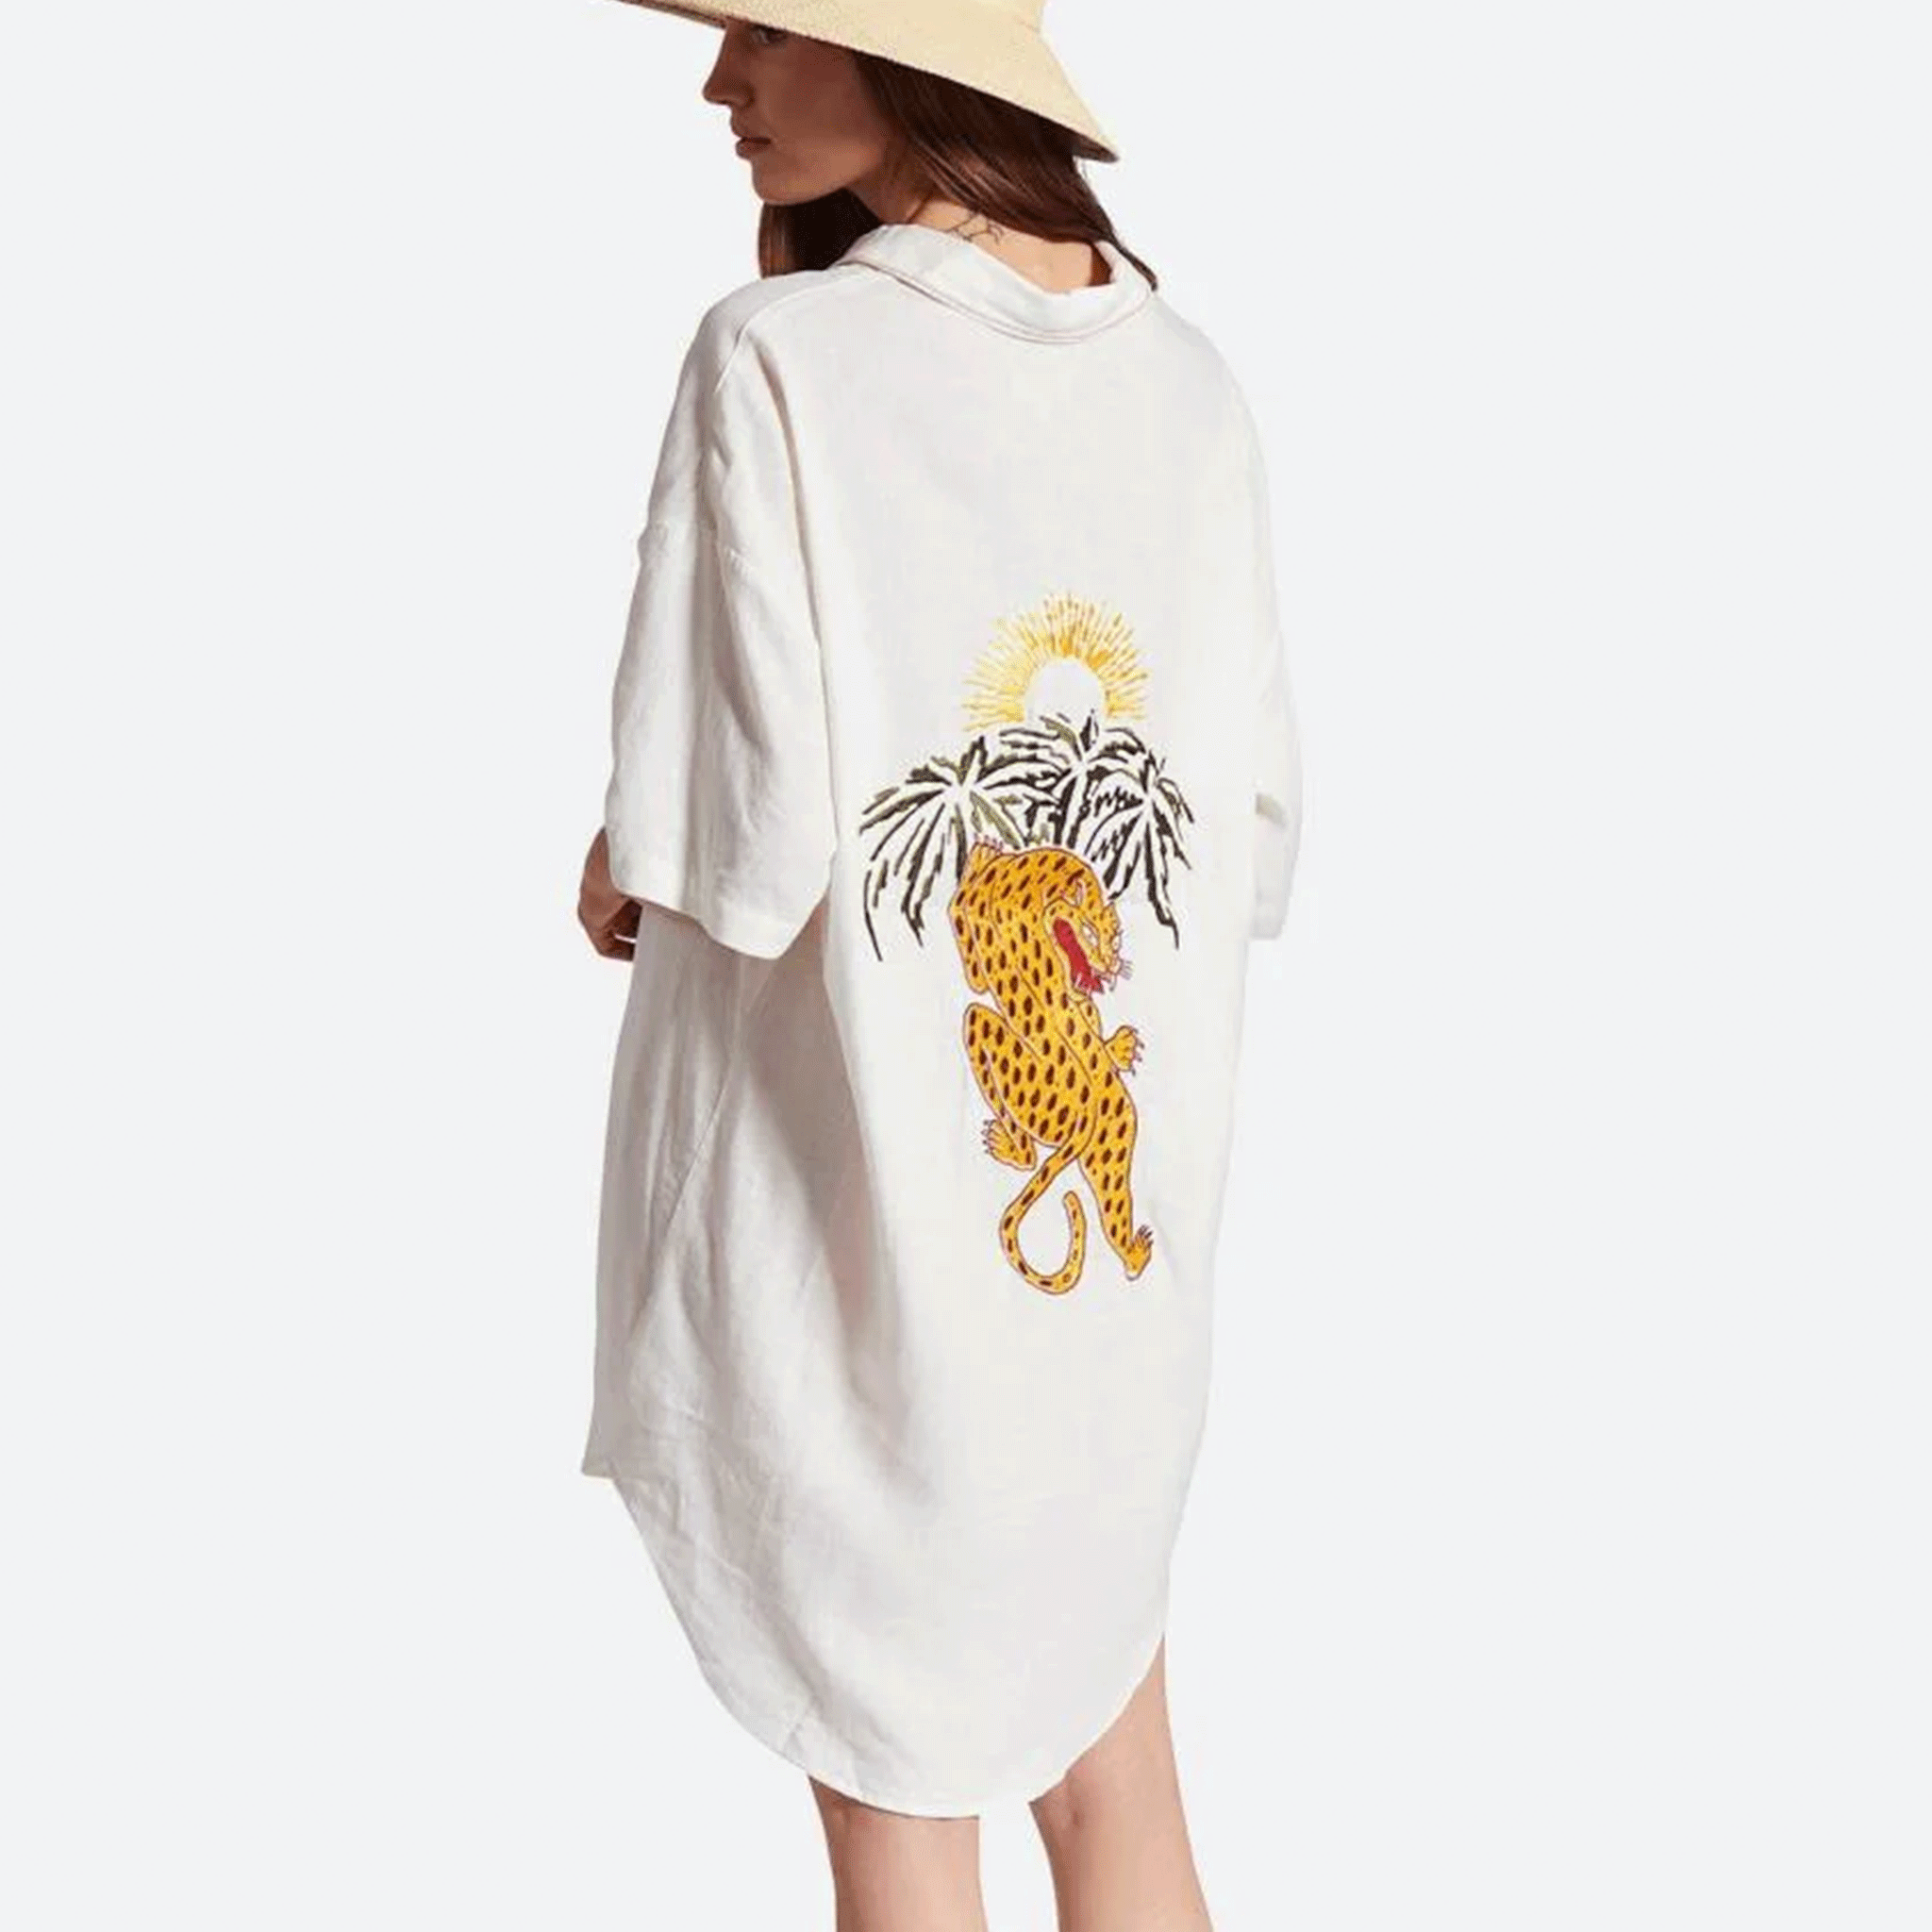 On a white background is a button up shirt dress with short sleeves and a jaguar and palm tree graphic on the back.